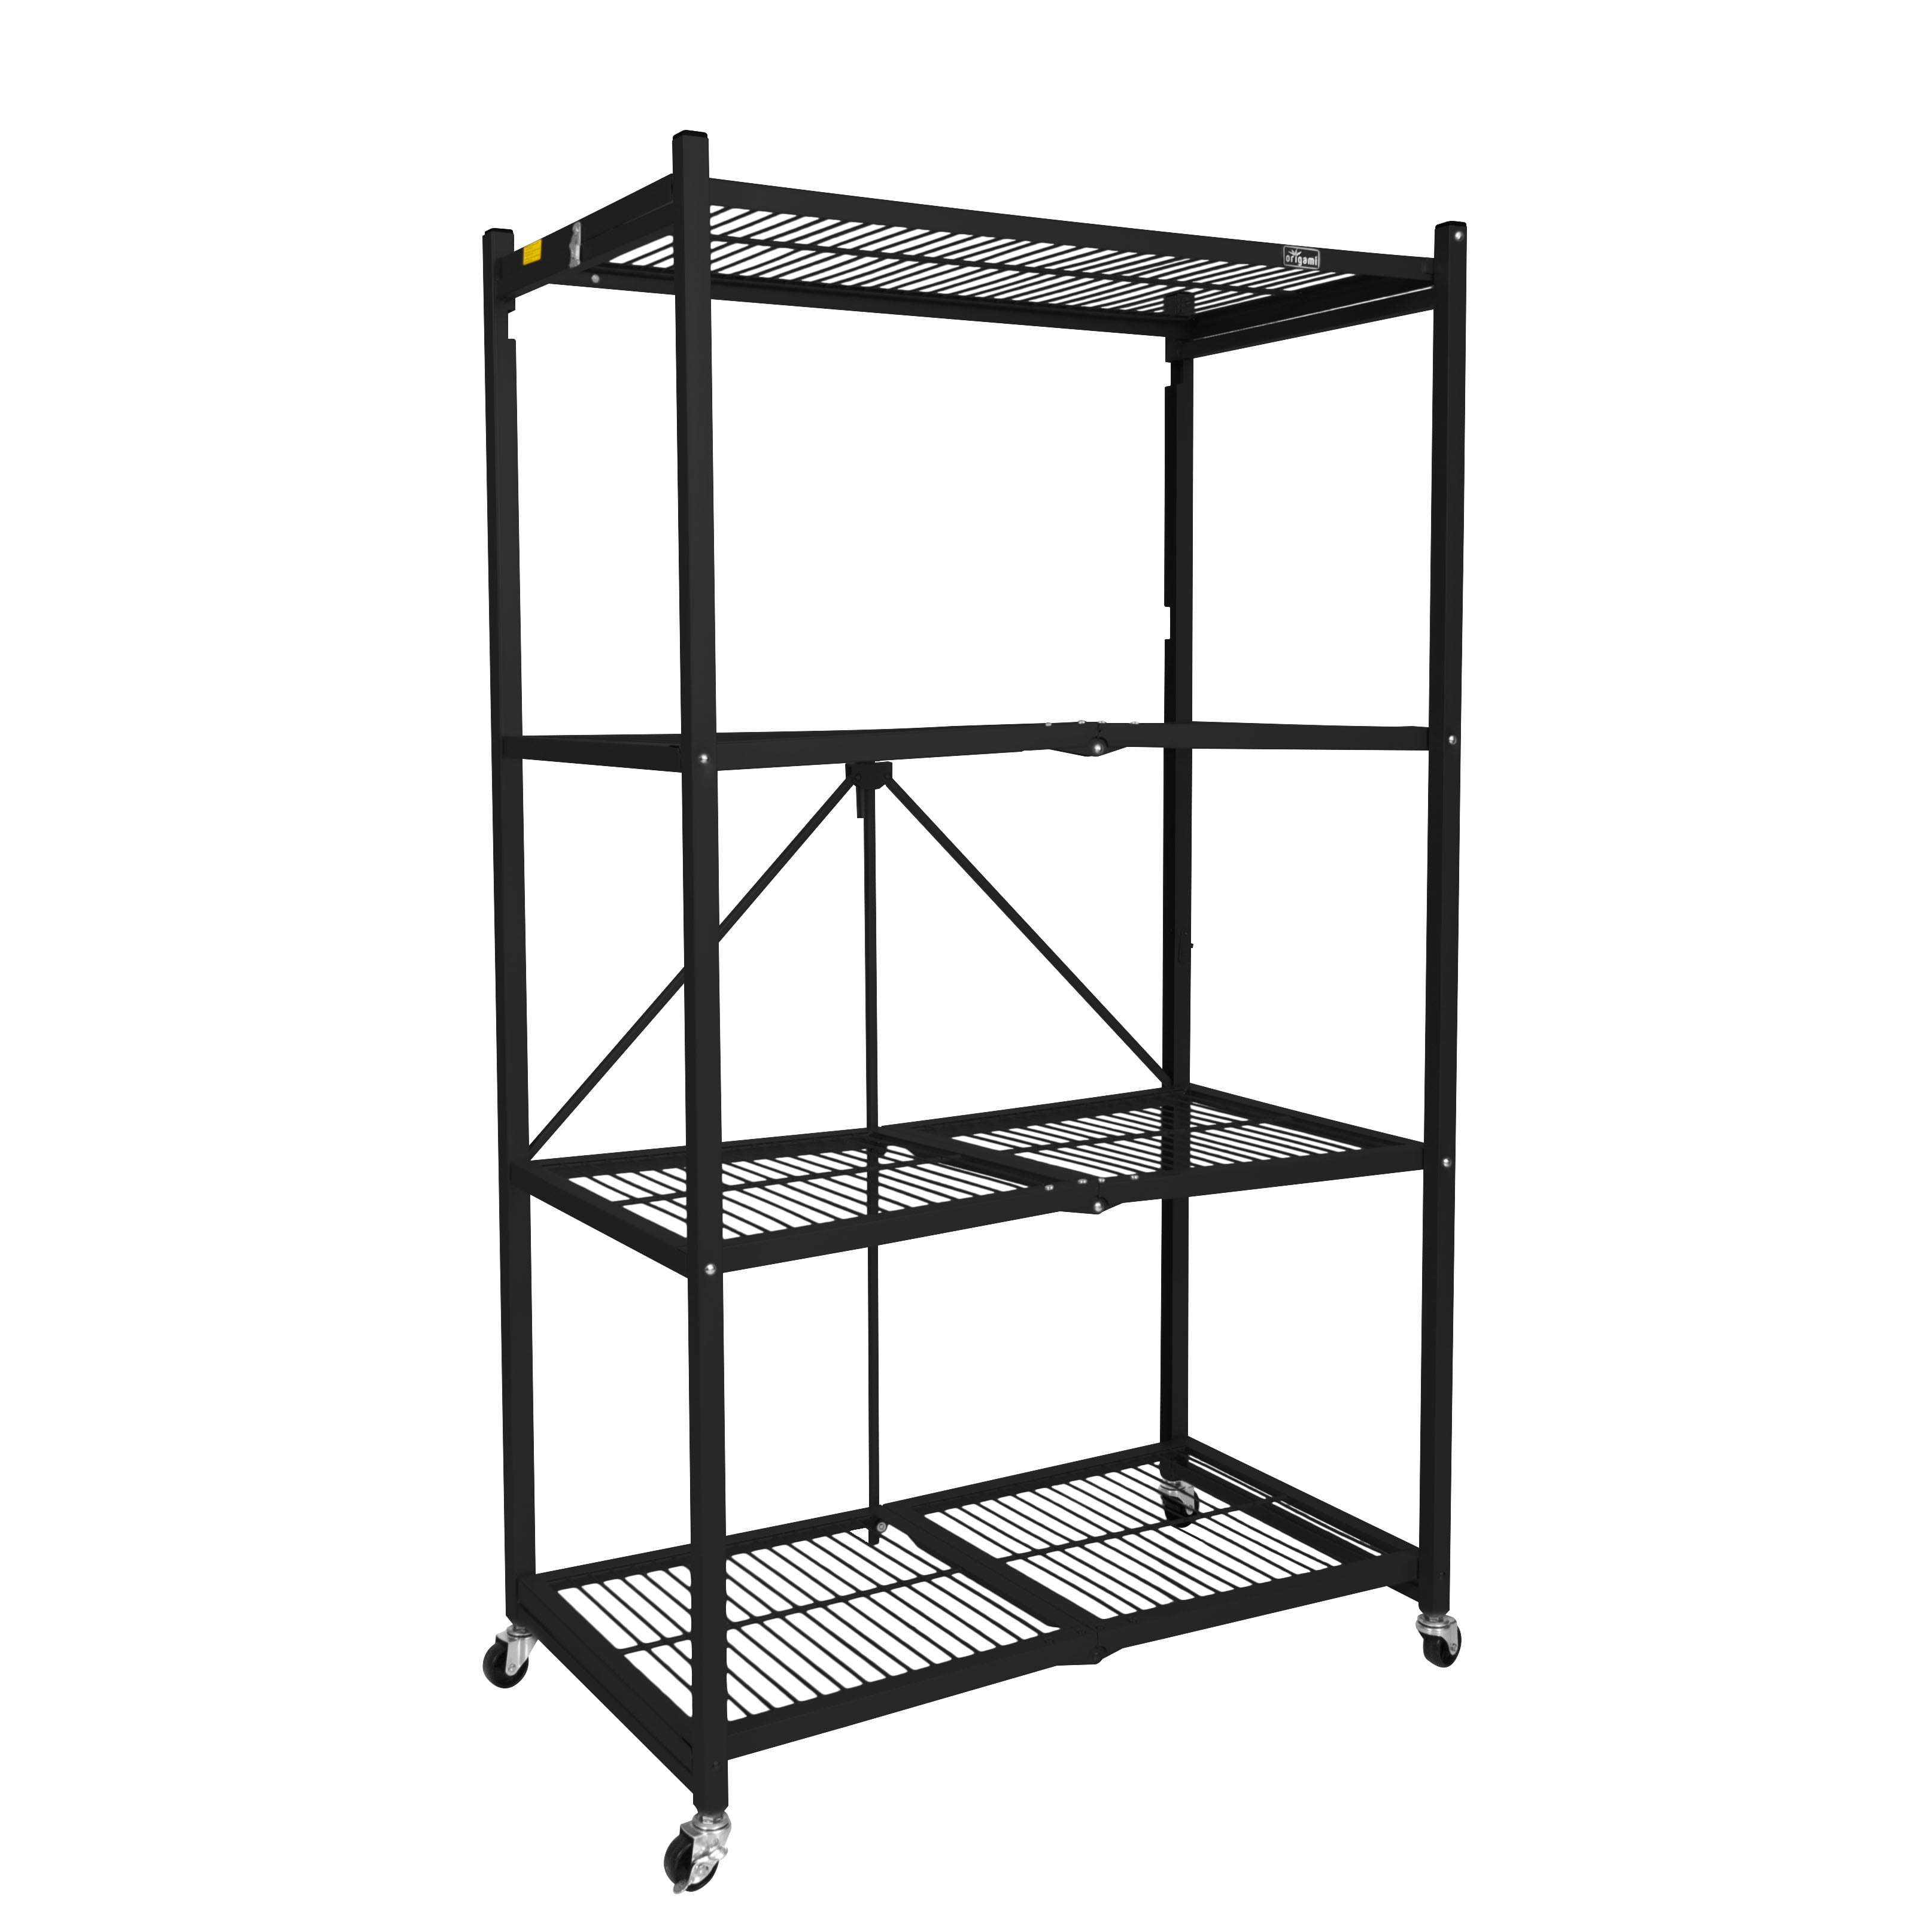 Origami Connection Bridge Racks for R5 Series 4-Shelf Large Storage Rack - Coral 2 Pack Extend Your Racks 36 inches for Connected Storage Solution System | 